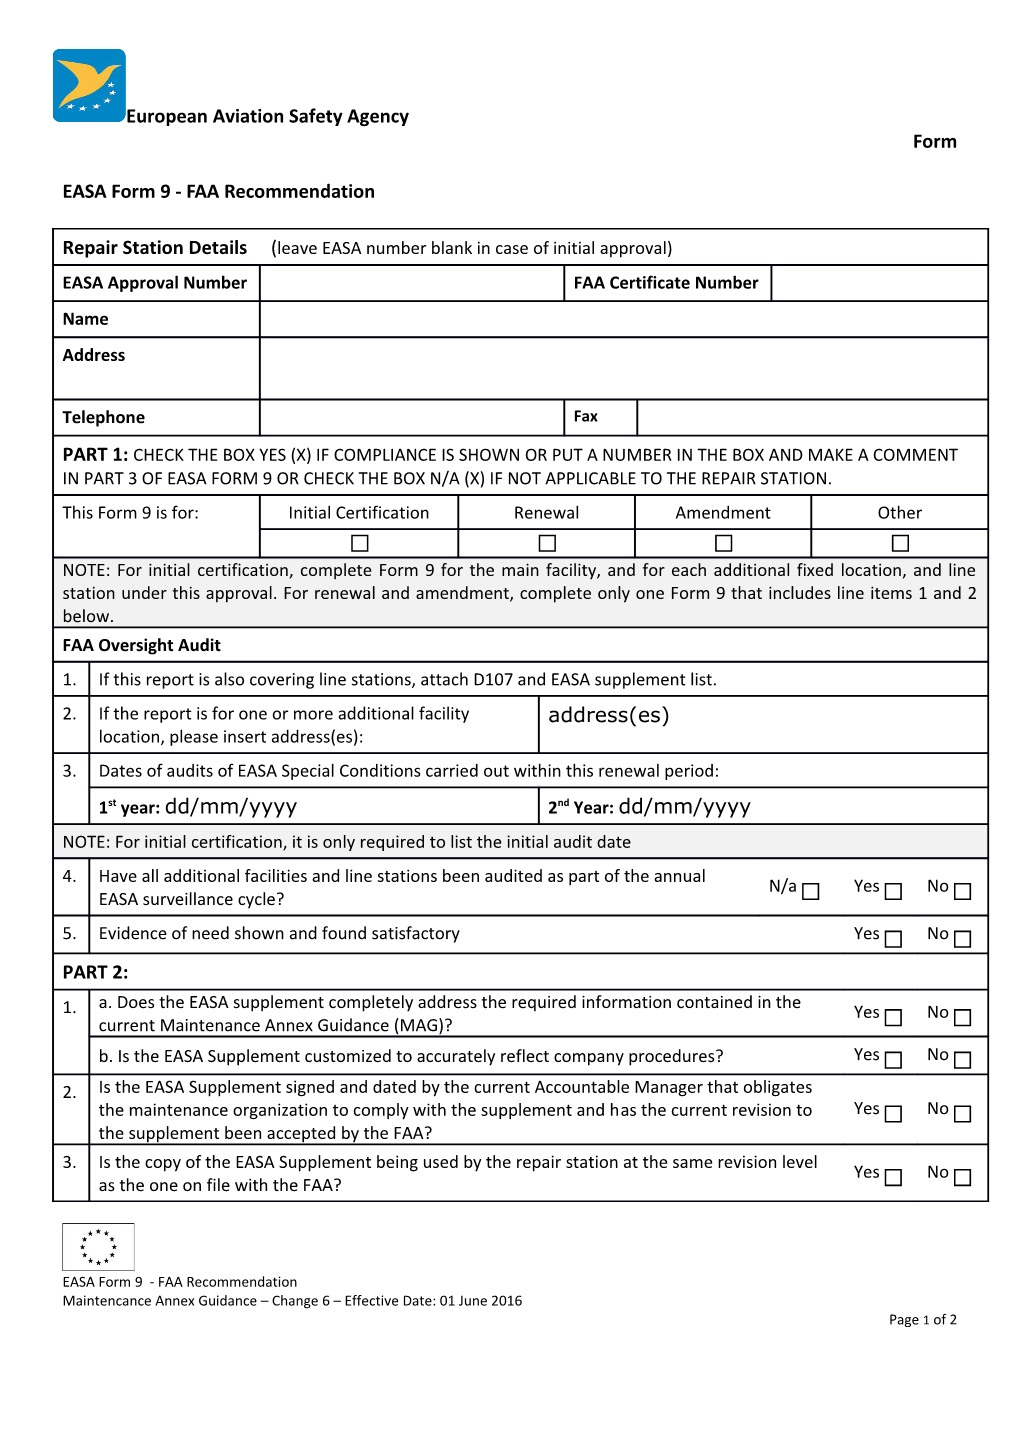 EASA Form 9 - FAA Recommendation